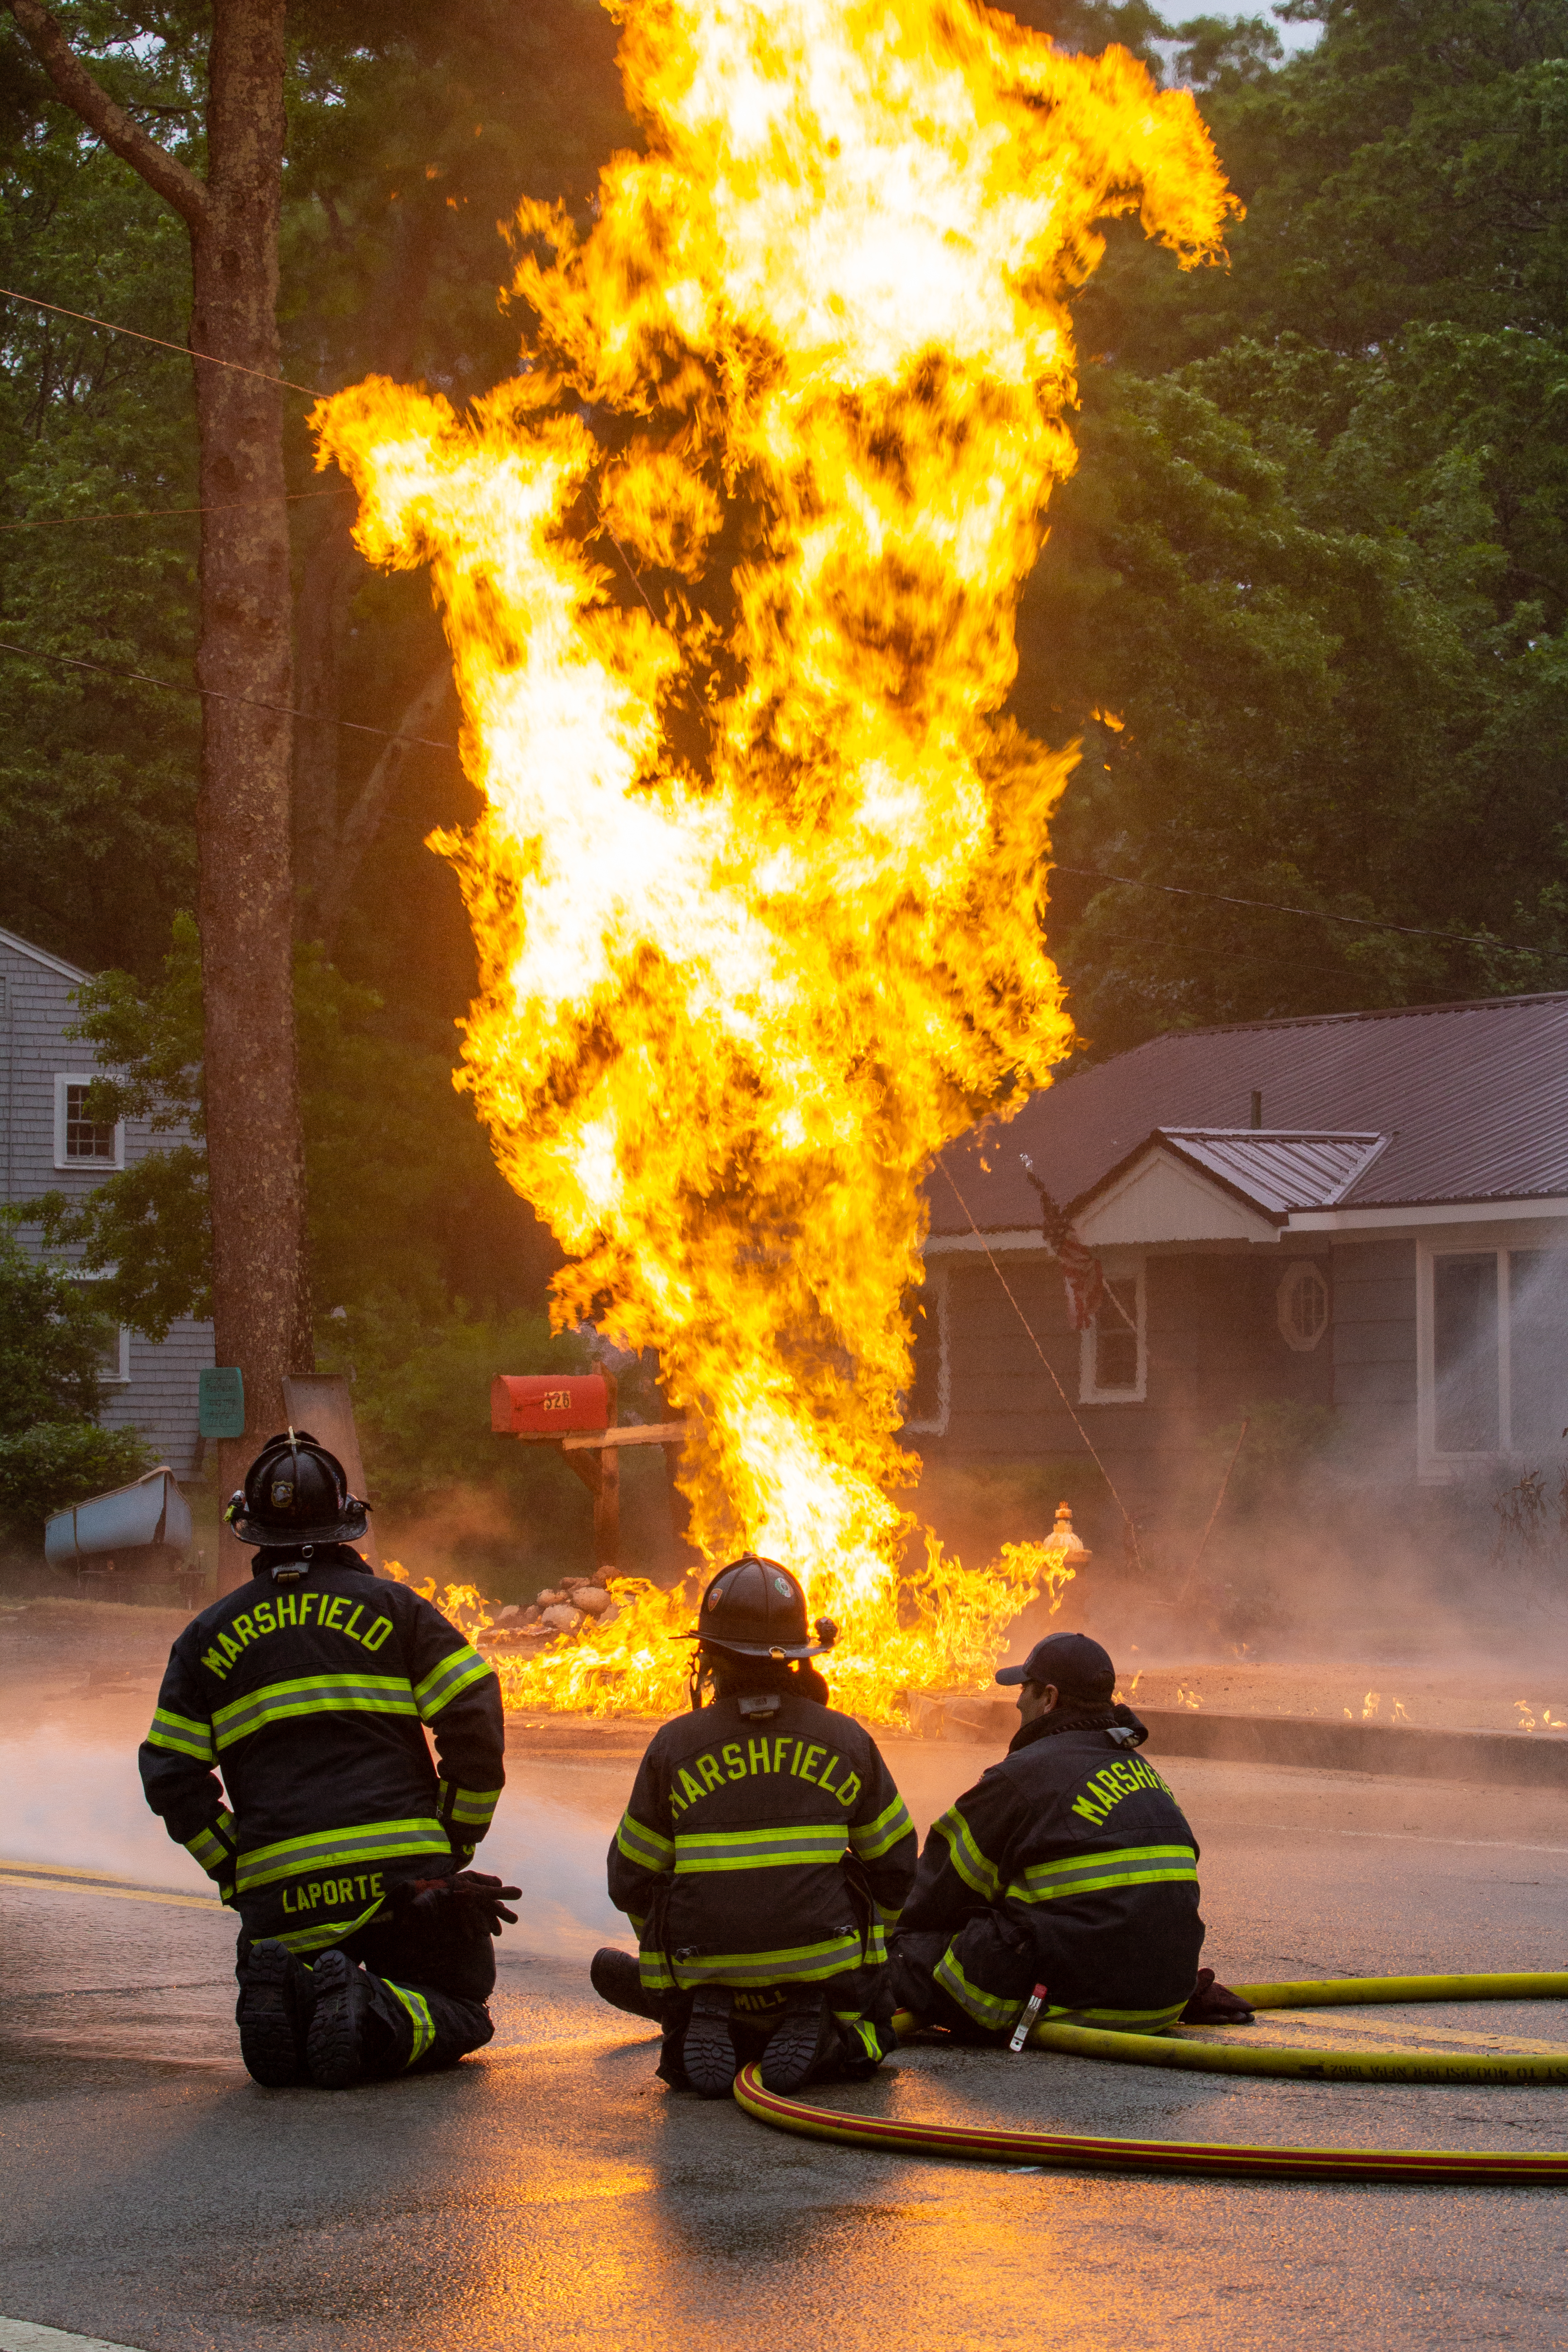 Gas line rupture and subsequent fire on Plain Street May 2021